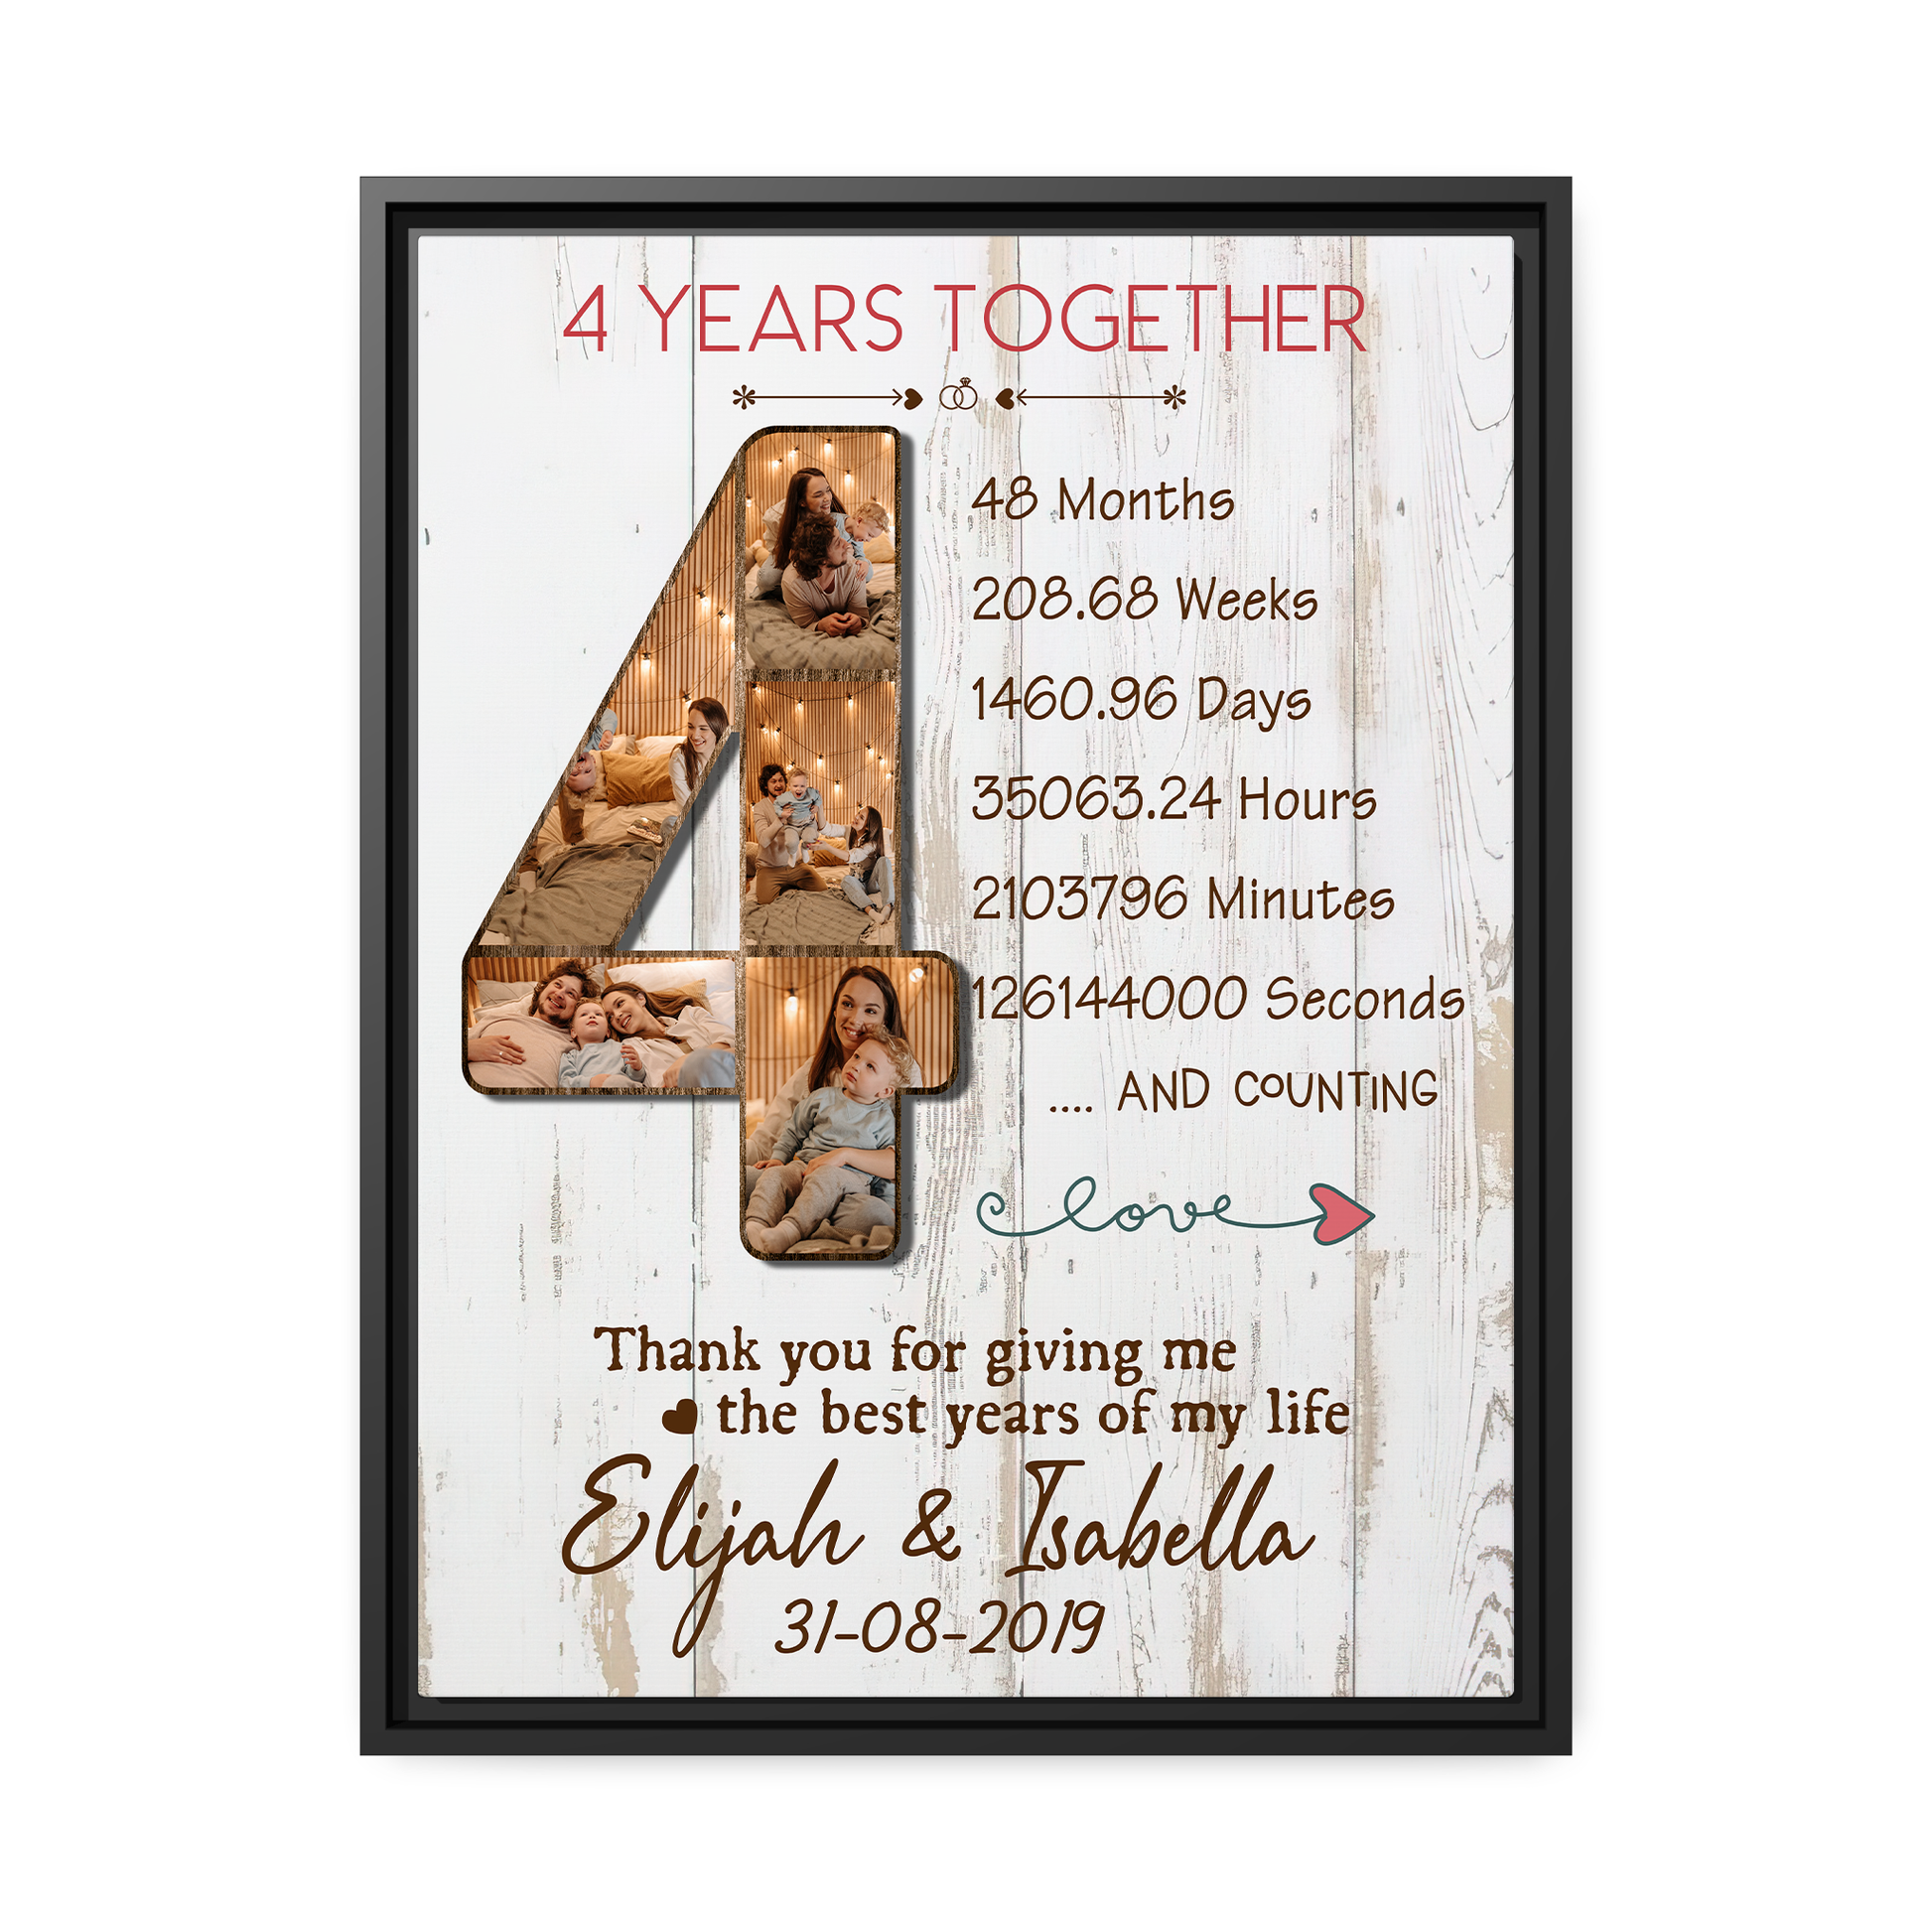 Personalized wedding anniversary gift for him for her - 4 years together - custom Couple photo canvas print - MyMindfulGifts